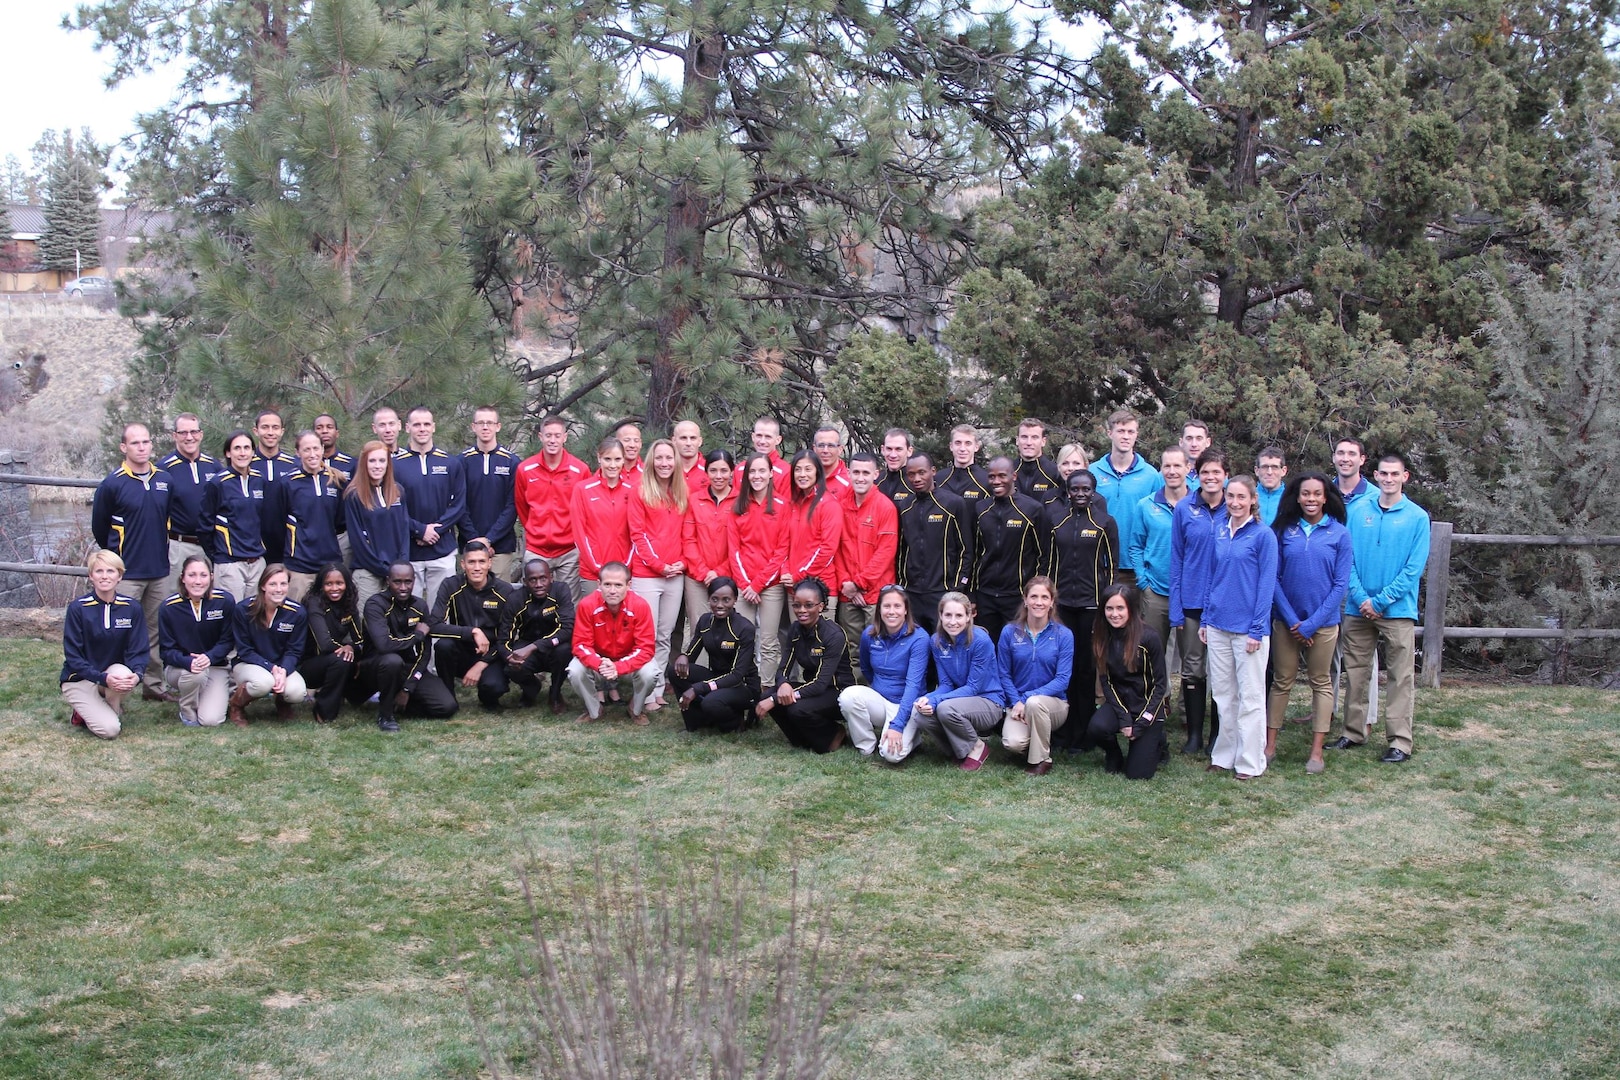 Service teams from the Army, Marine Corps, Navy and Air Force gather together for a group photo.  The 2016 Armed Forces Cross Country Championship was held in conjunction with the USA Track and Field National Championship in Bend, Ore.  Army Men and Women teams swept the team competitions.  Army Men captured their third straight title with the Women repeating their 2015 performance.  Photo by Tom Higgins, Army Sports